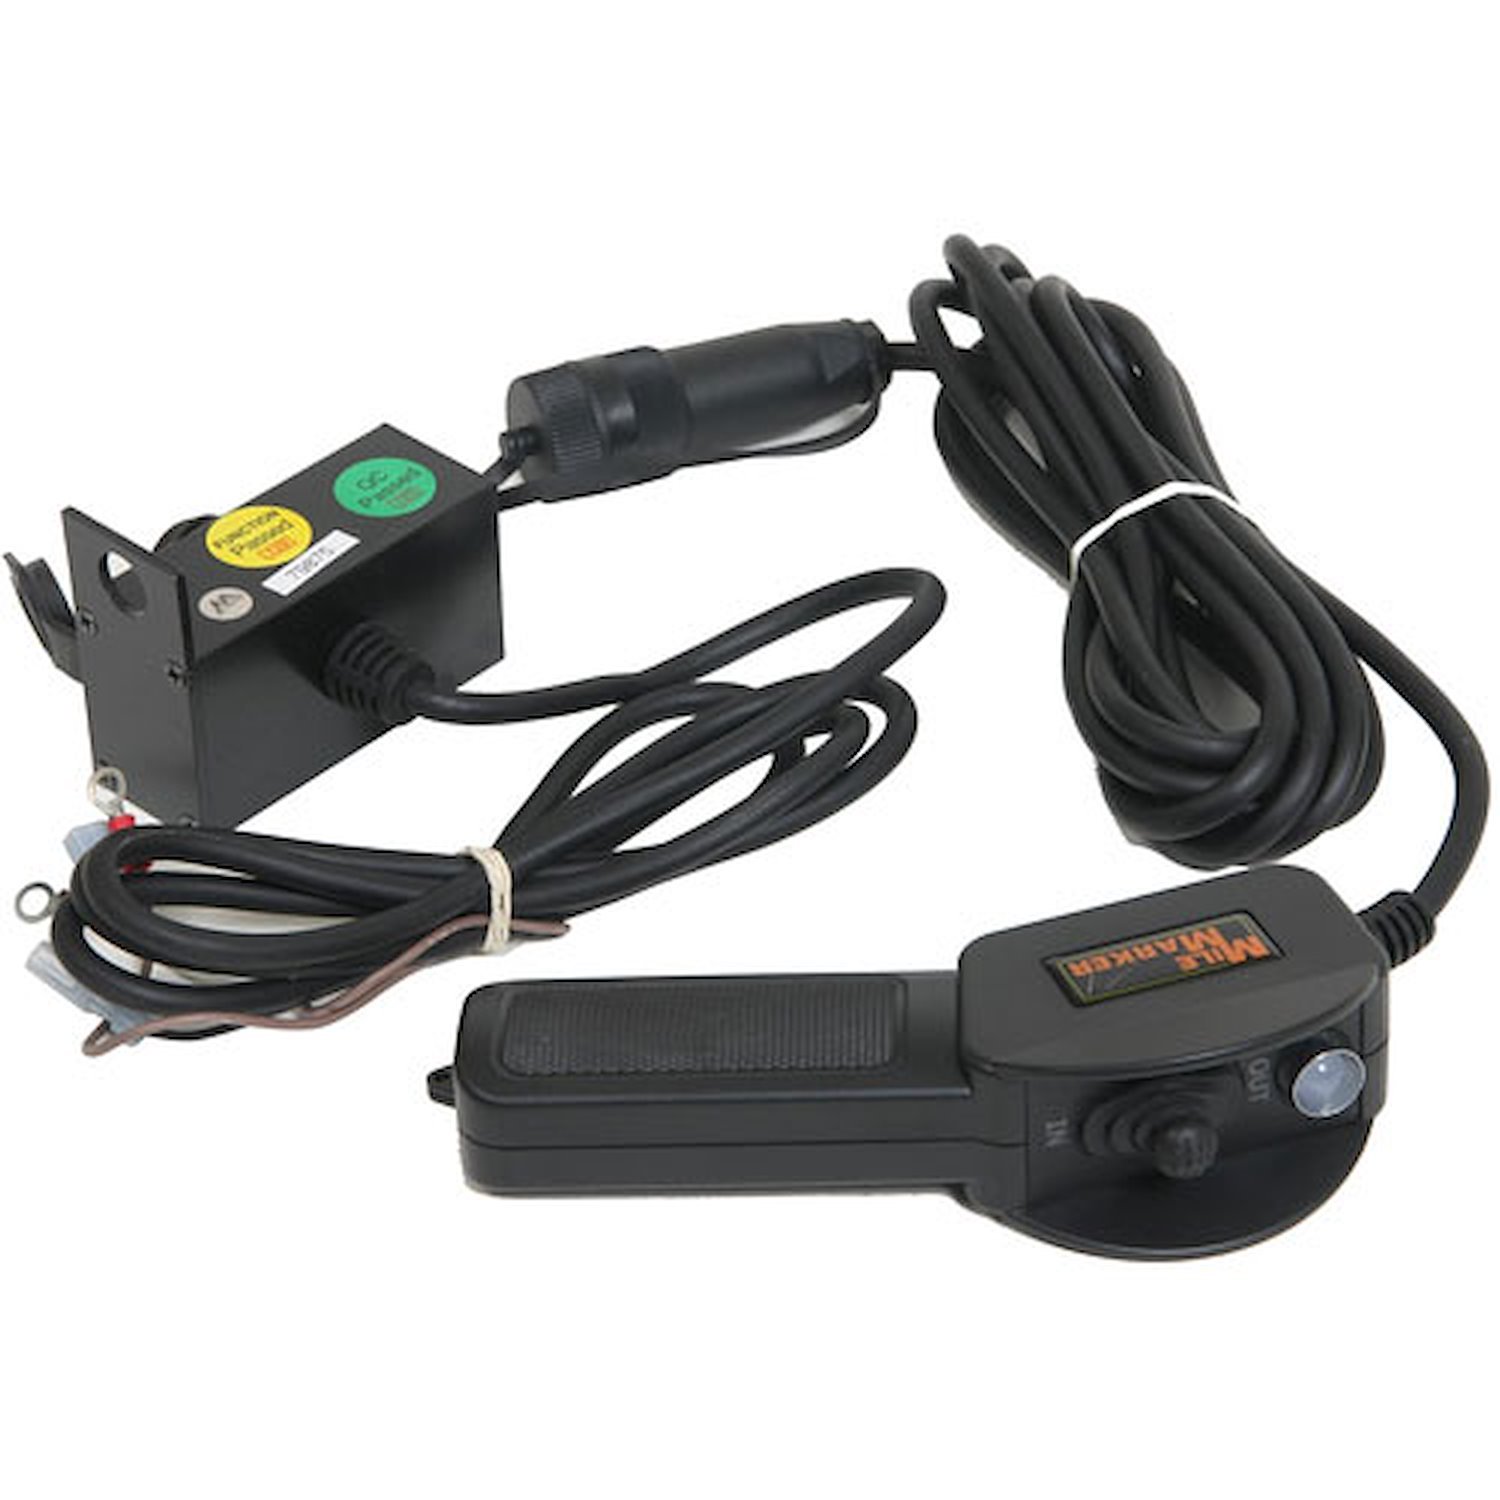 Plug & Play Wired Remote For All Hydraulic